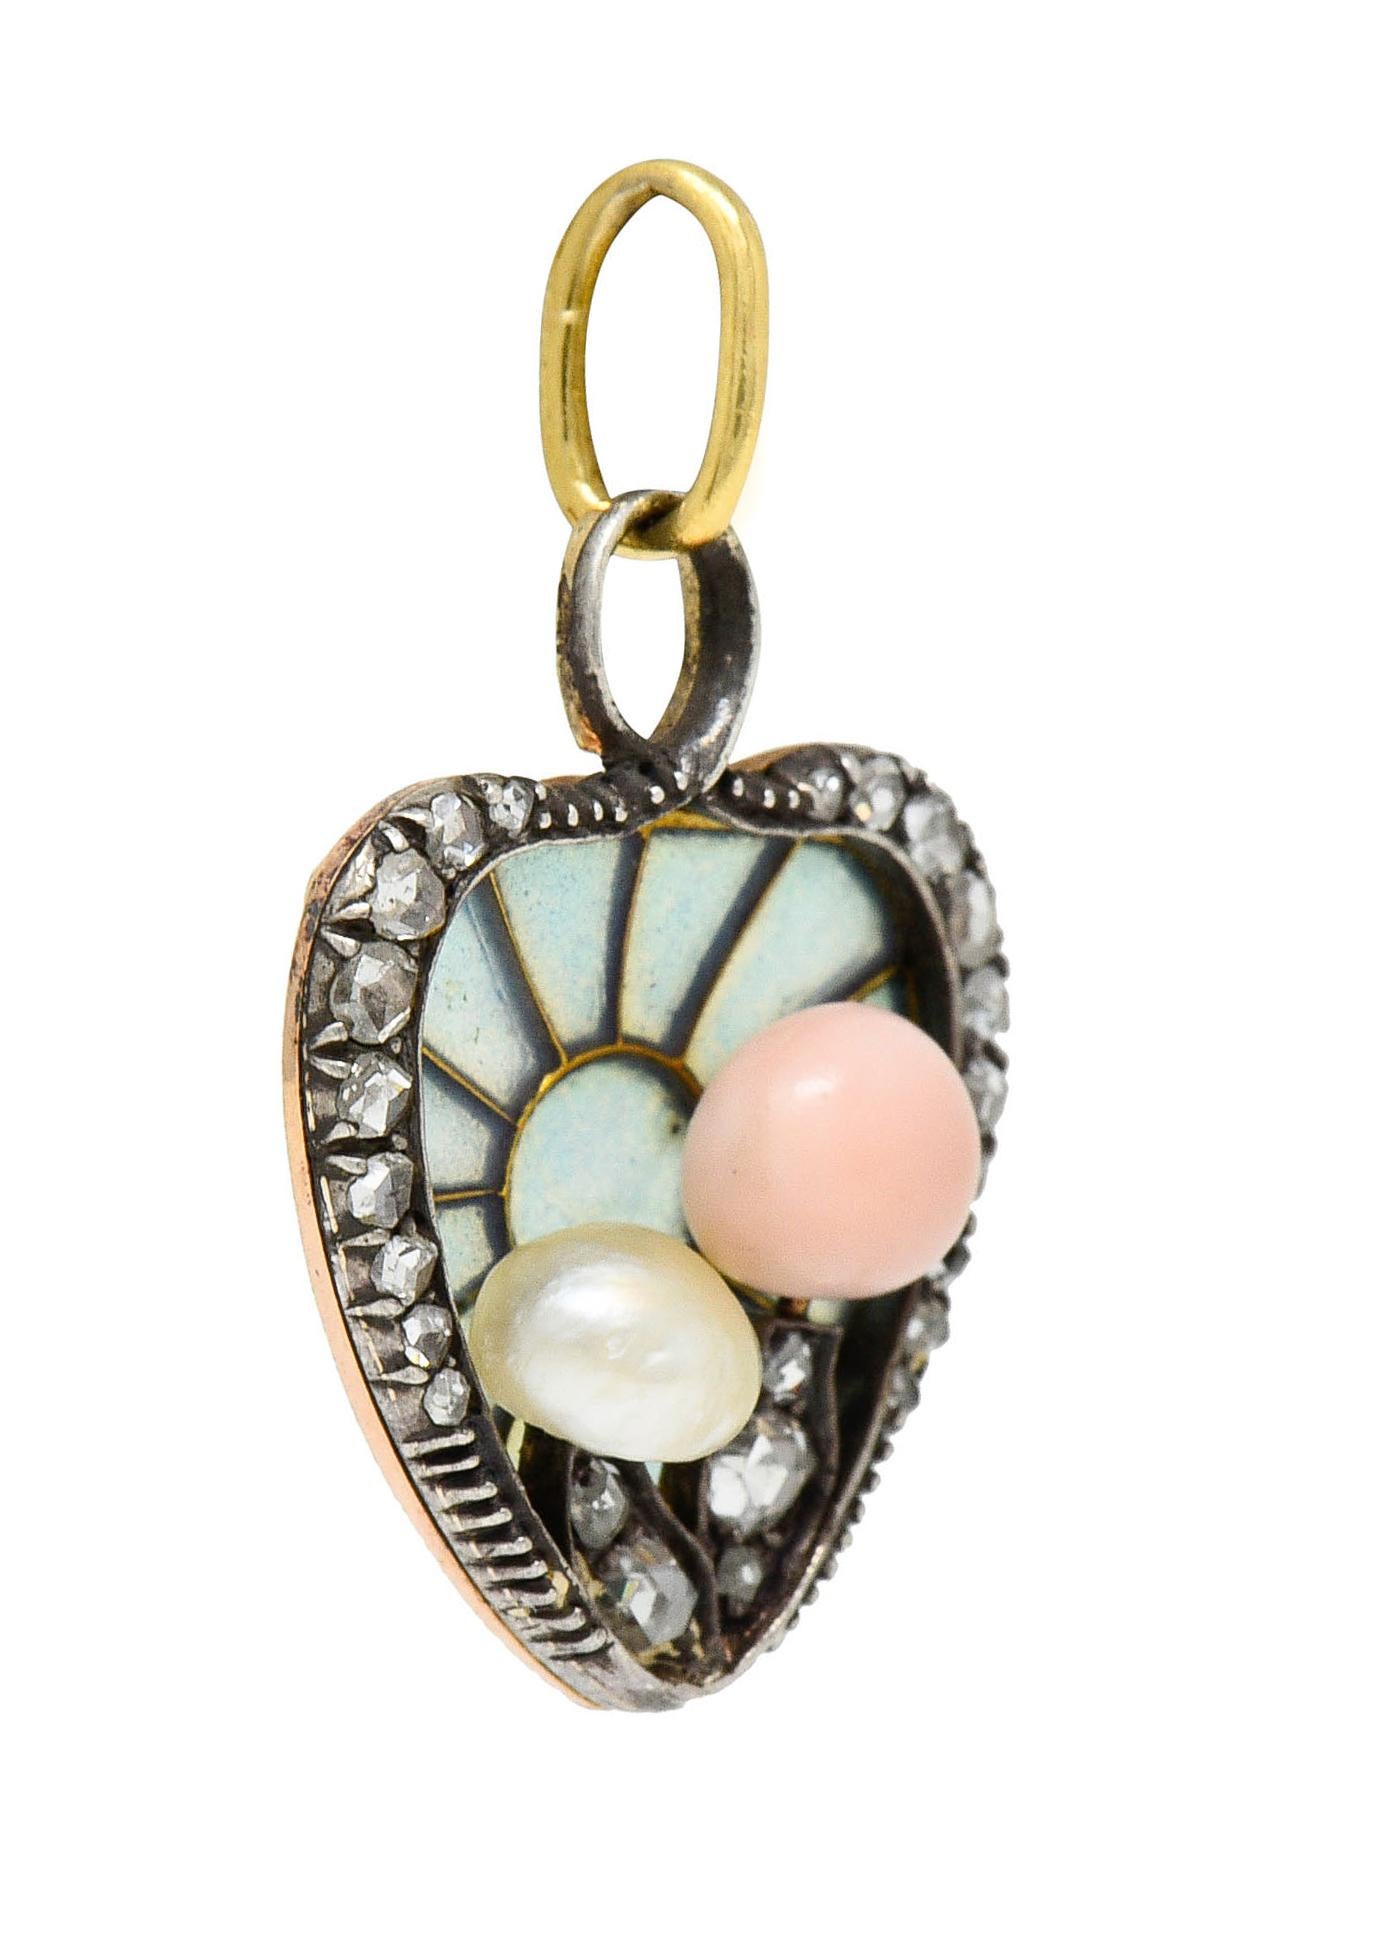 Heart shaped pendant charm designed as a radiating burst motif featuring translucent cornflower blue plique-á-jour - no loss

Depicting two stylized mushrooms one topped by a pink Conch pearl while other is topped by a white baroque pearl

Accented